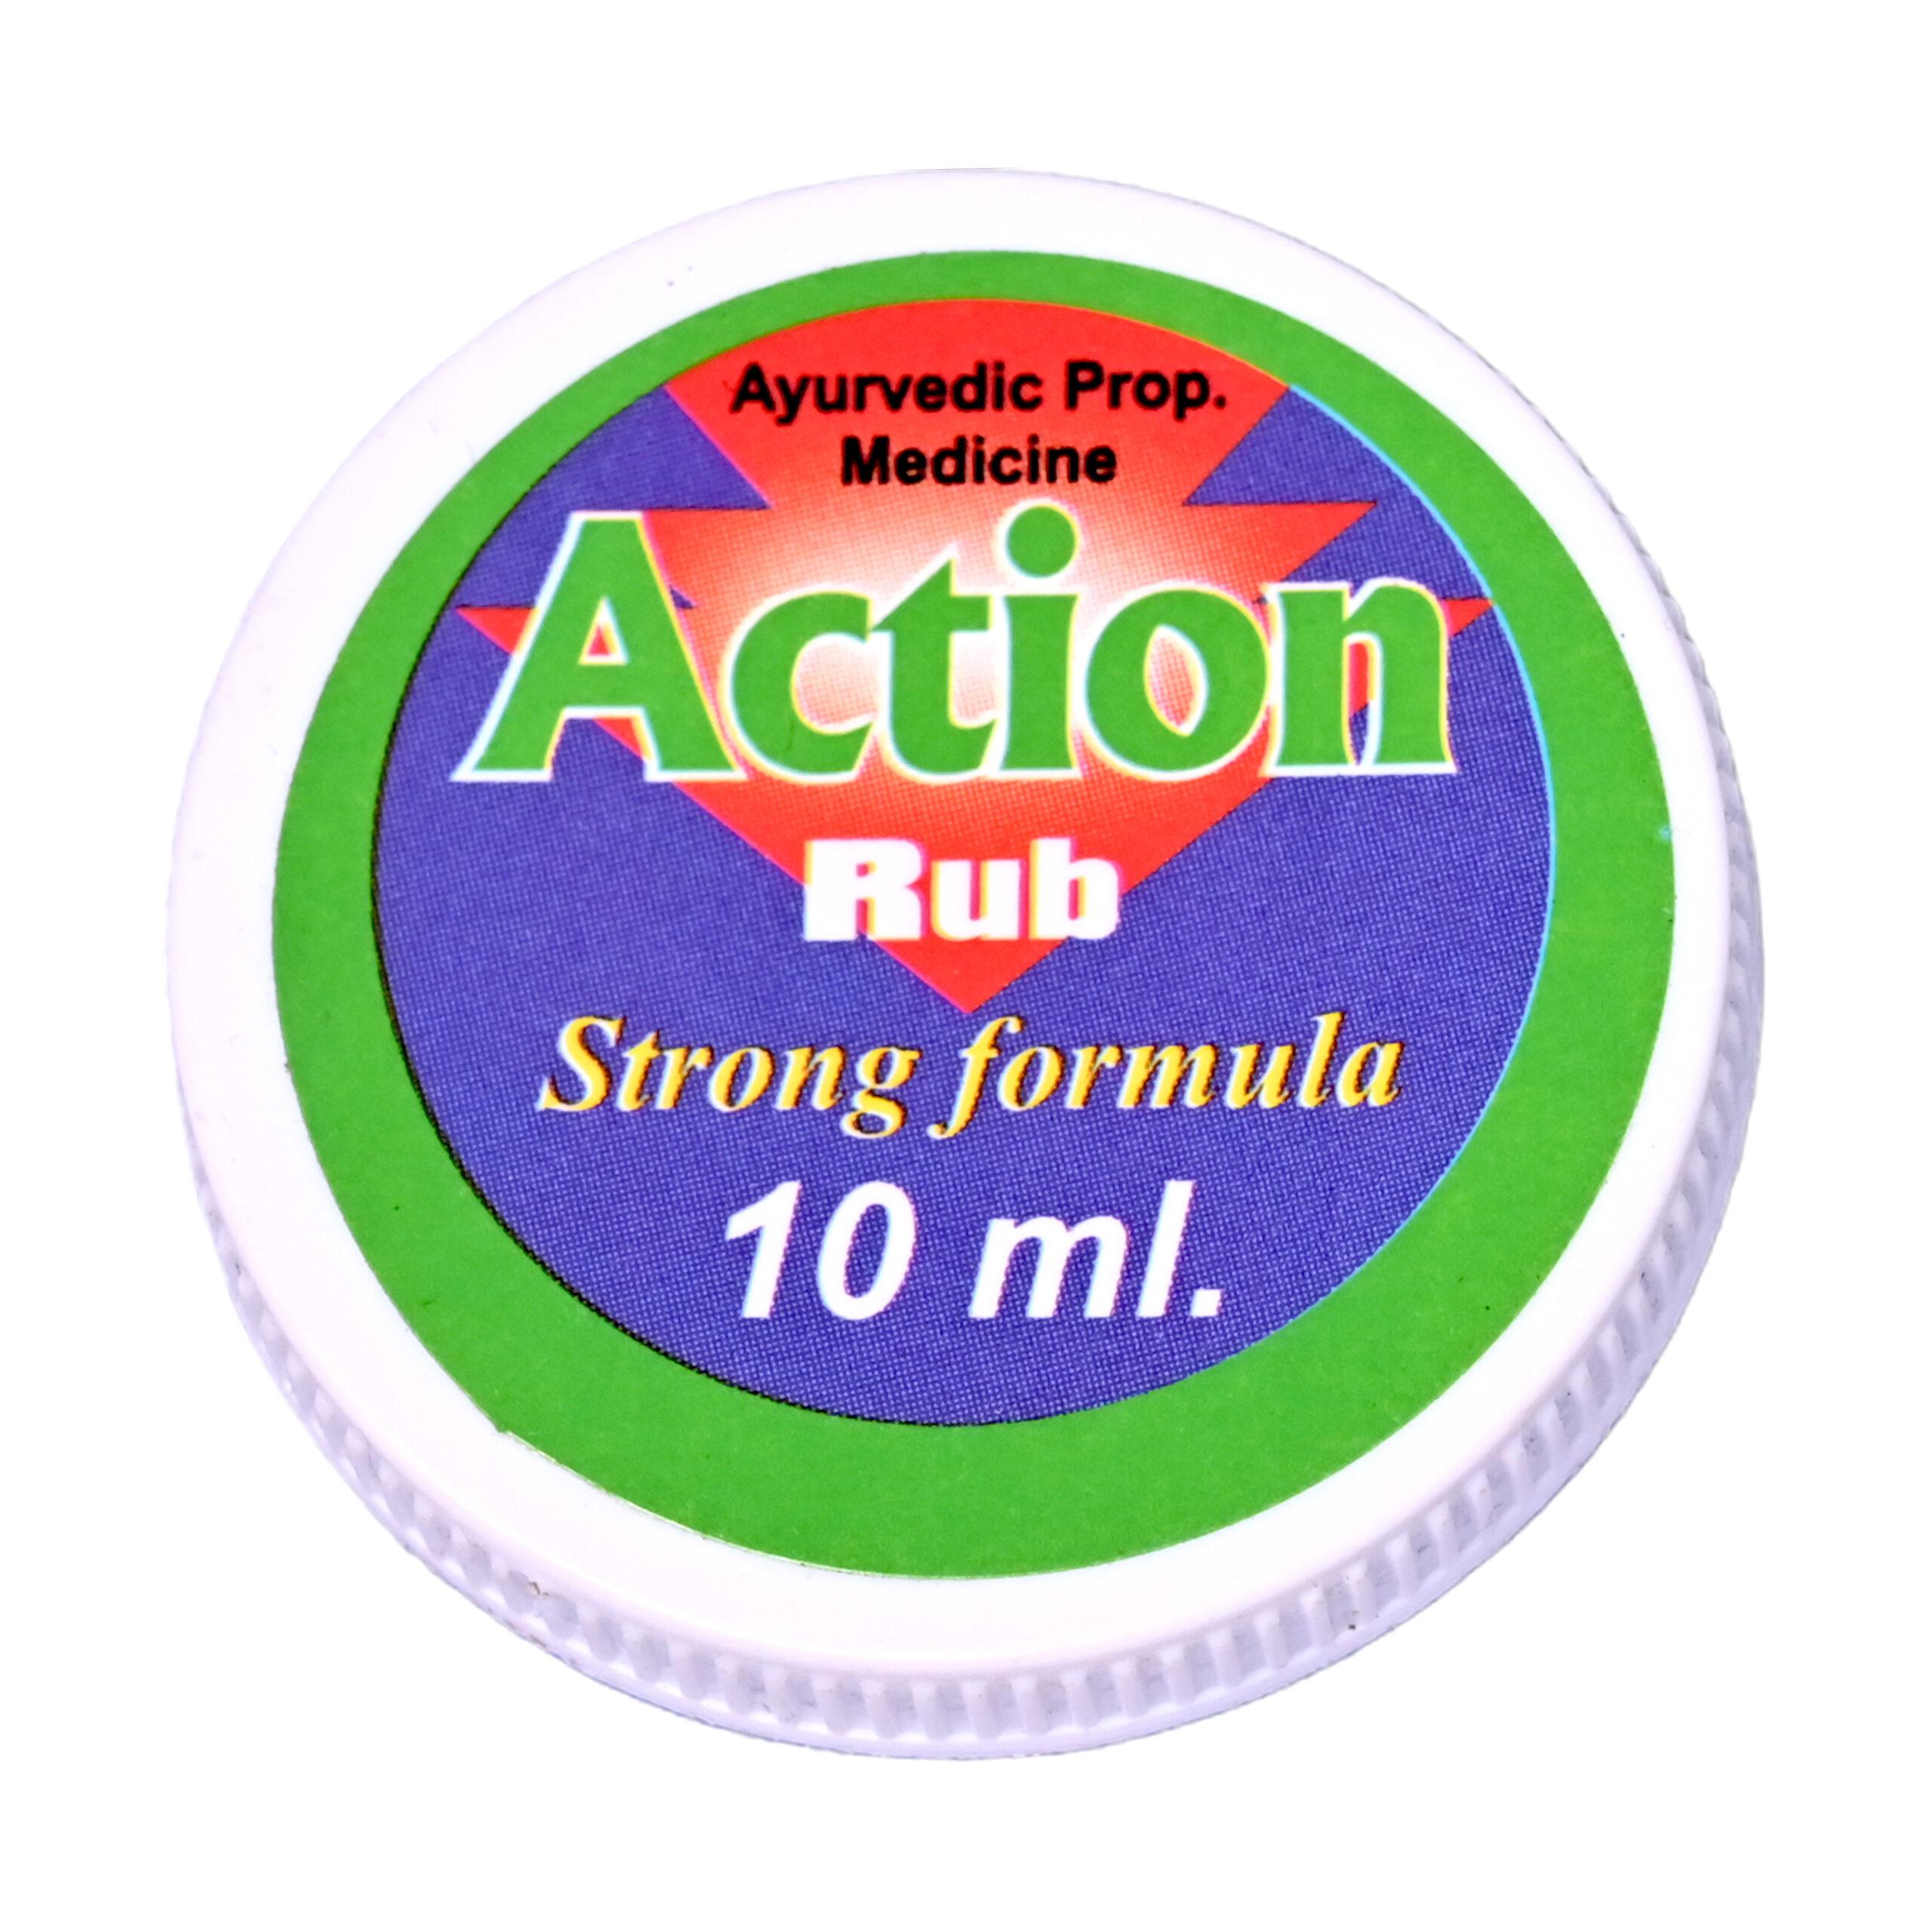 Action Rub, Herbal Pain Relief Balm, Ayurvedic Muscle Rub, Natural Joint Pain Relief, Topical Pain Reliever, Muscle Relaxant Balm, Joint Pain Soothing Gel, Ayurvedic Pain Balm, Herbal Analgesic Rub, Cough and cold